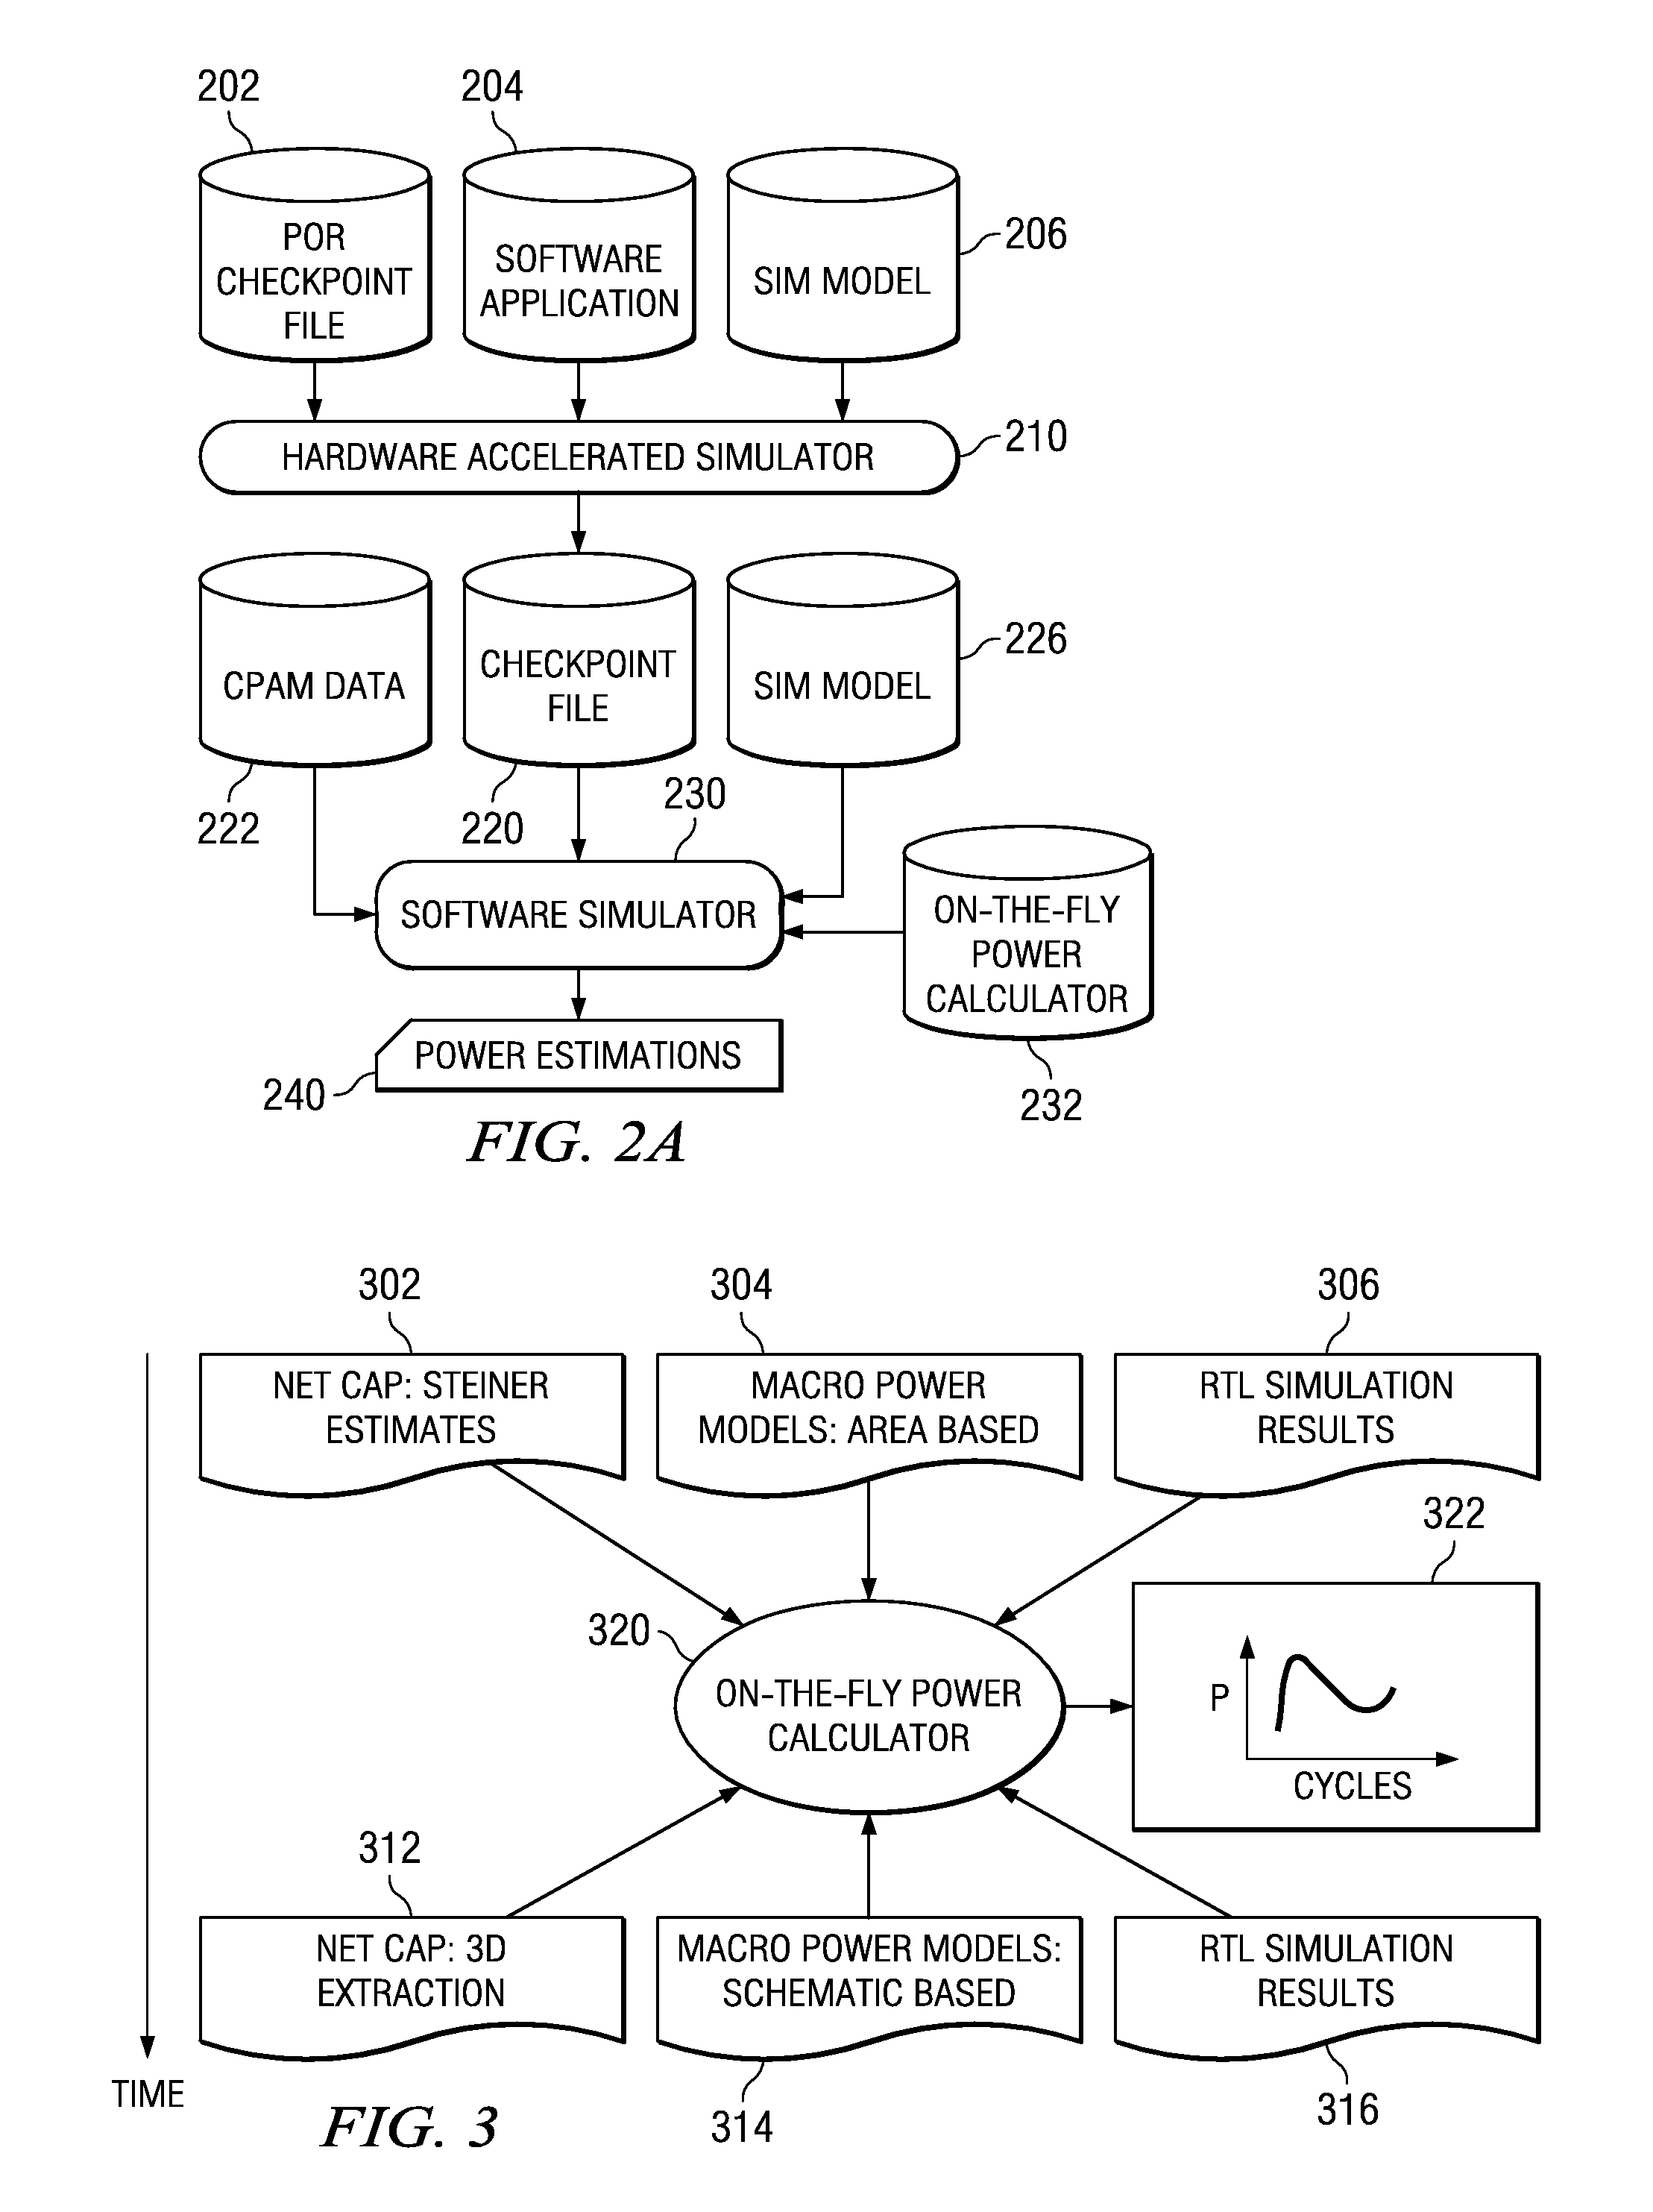 Method for performing power simulations on complex designs running complex software applications